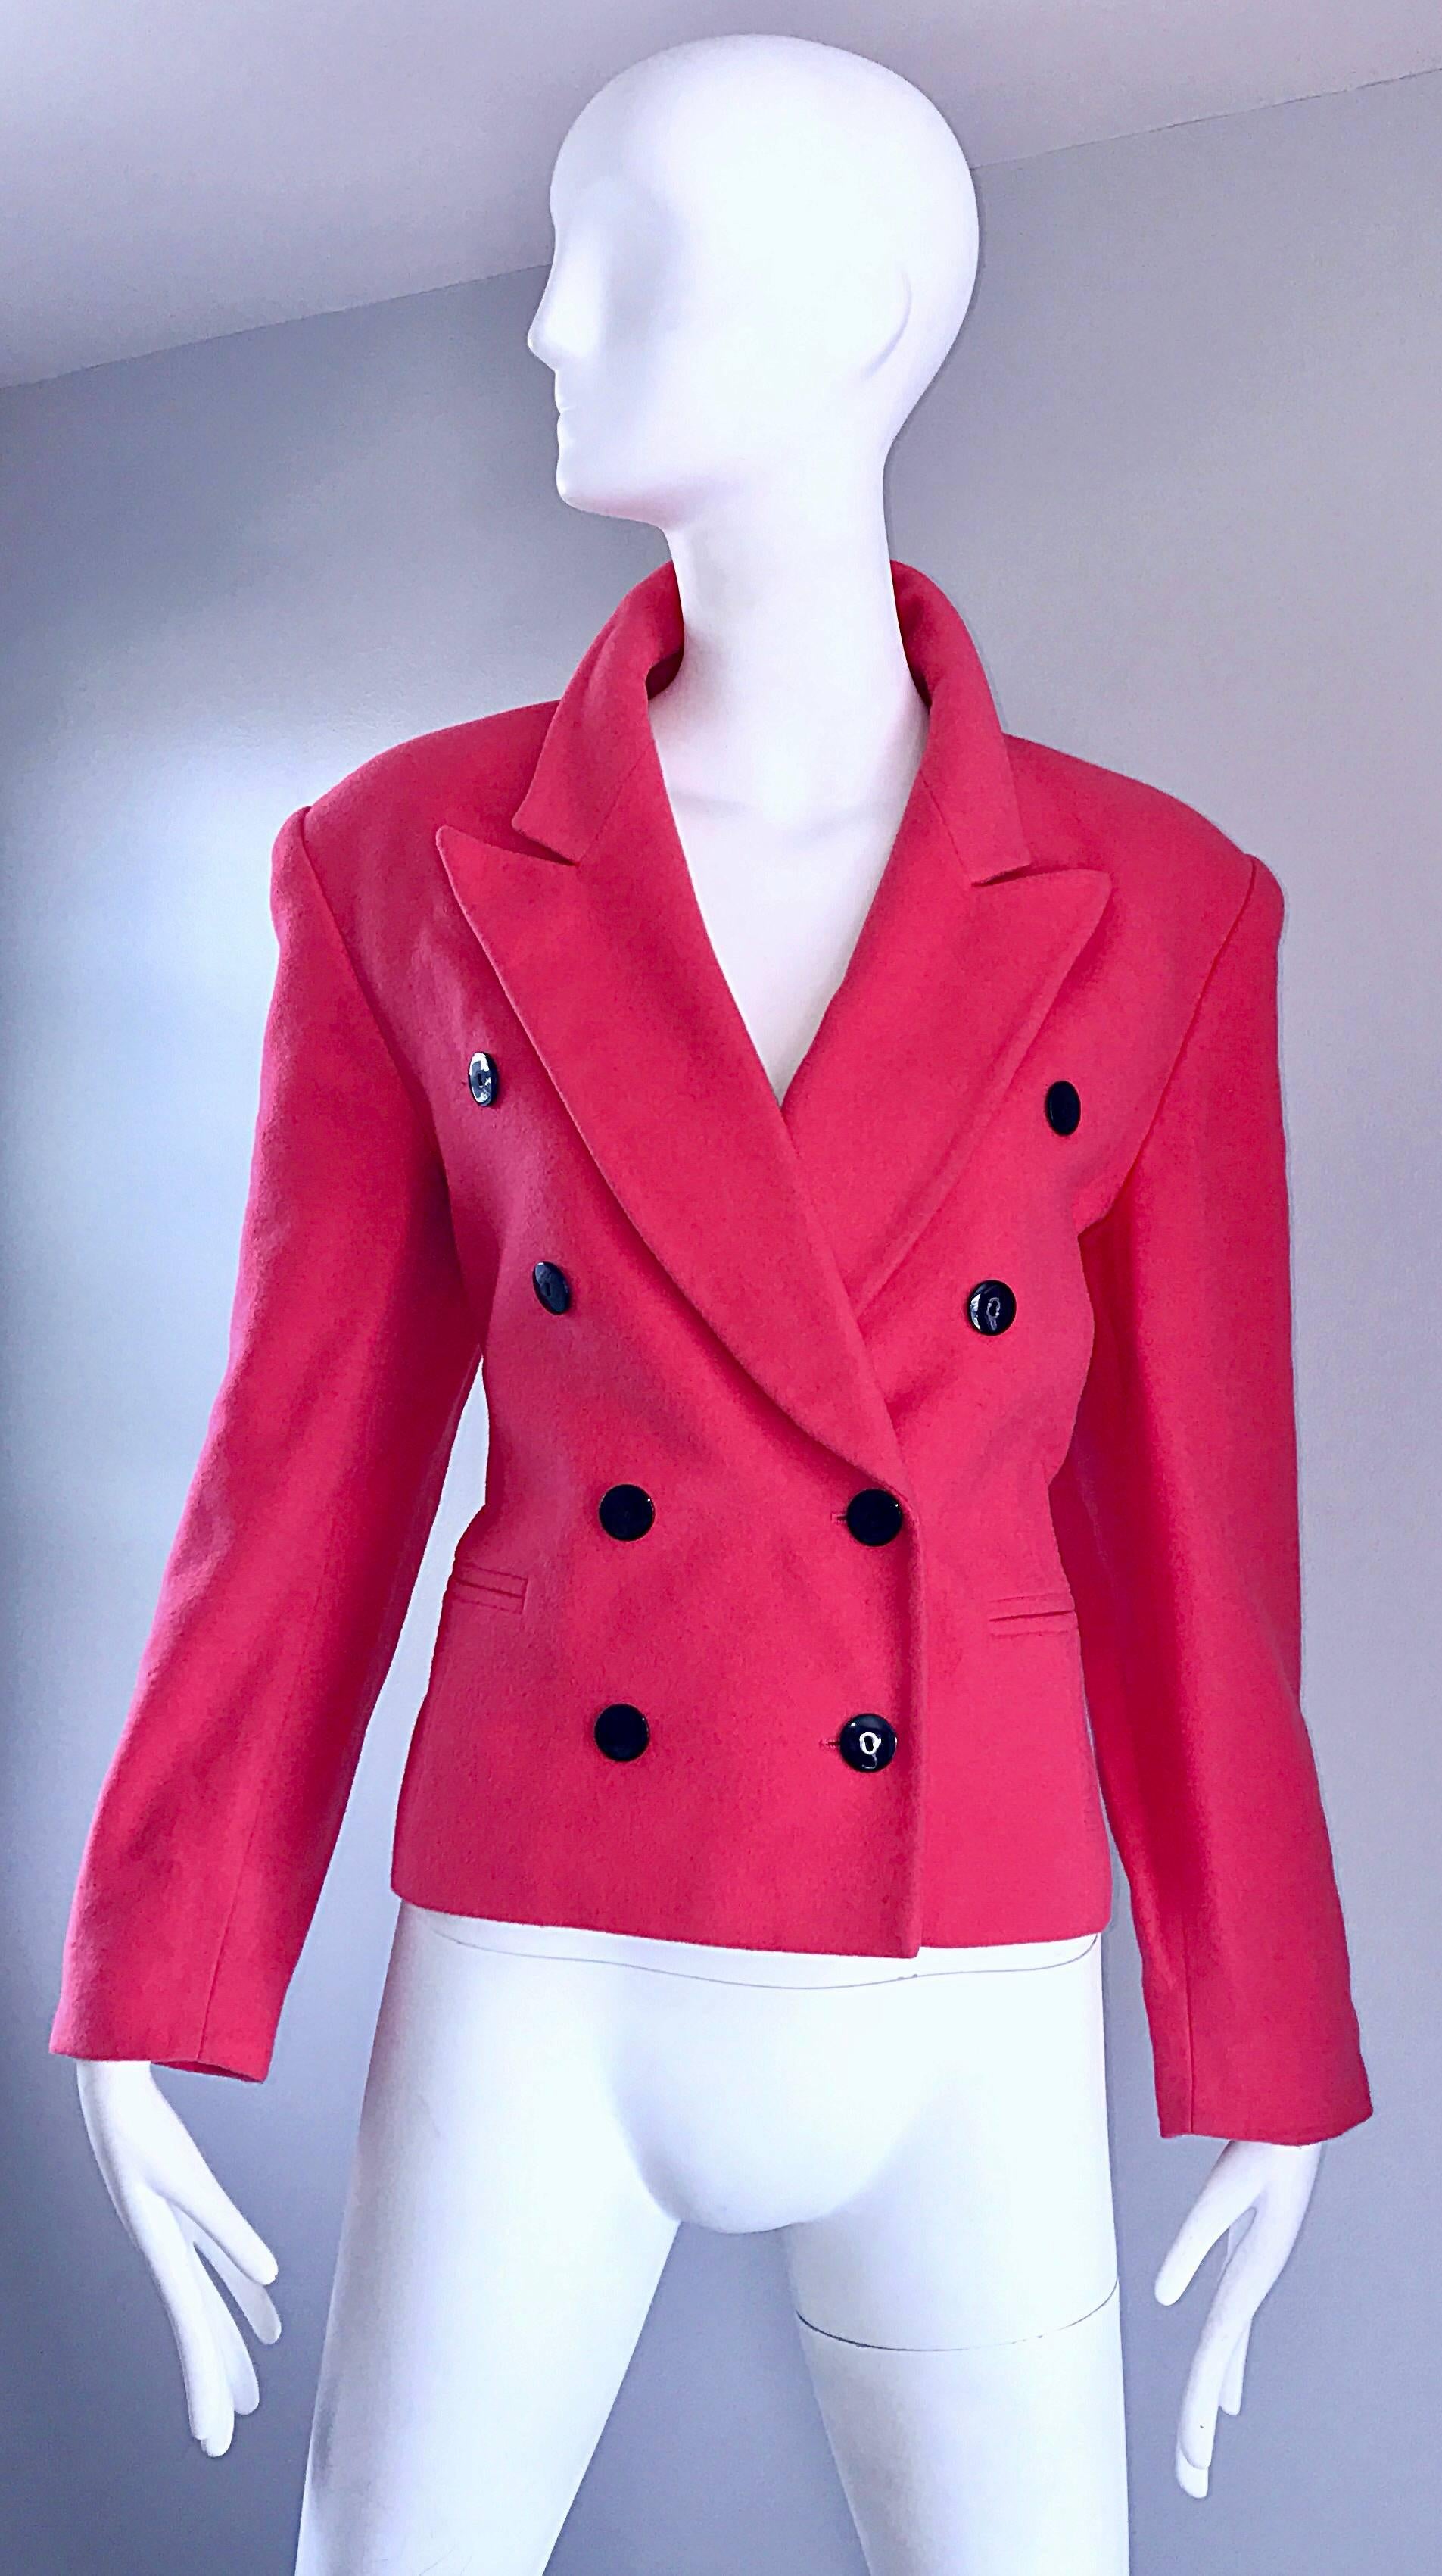 Wonderful vintage early 90s ESCADA by MARGARETHA LEY shocking hot pink cashmere and wool double breasted blazer jacket! Features contrasting black lacquer buttons up the bodice. Fully lined, with pockets at each side of the waist. Can easily be